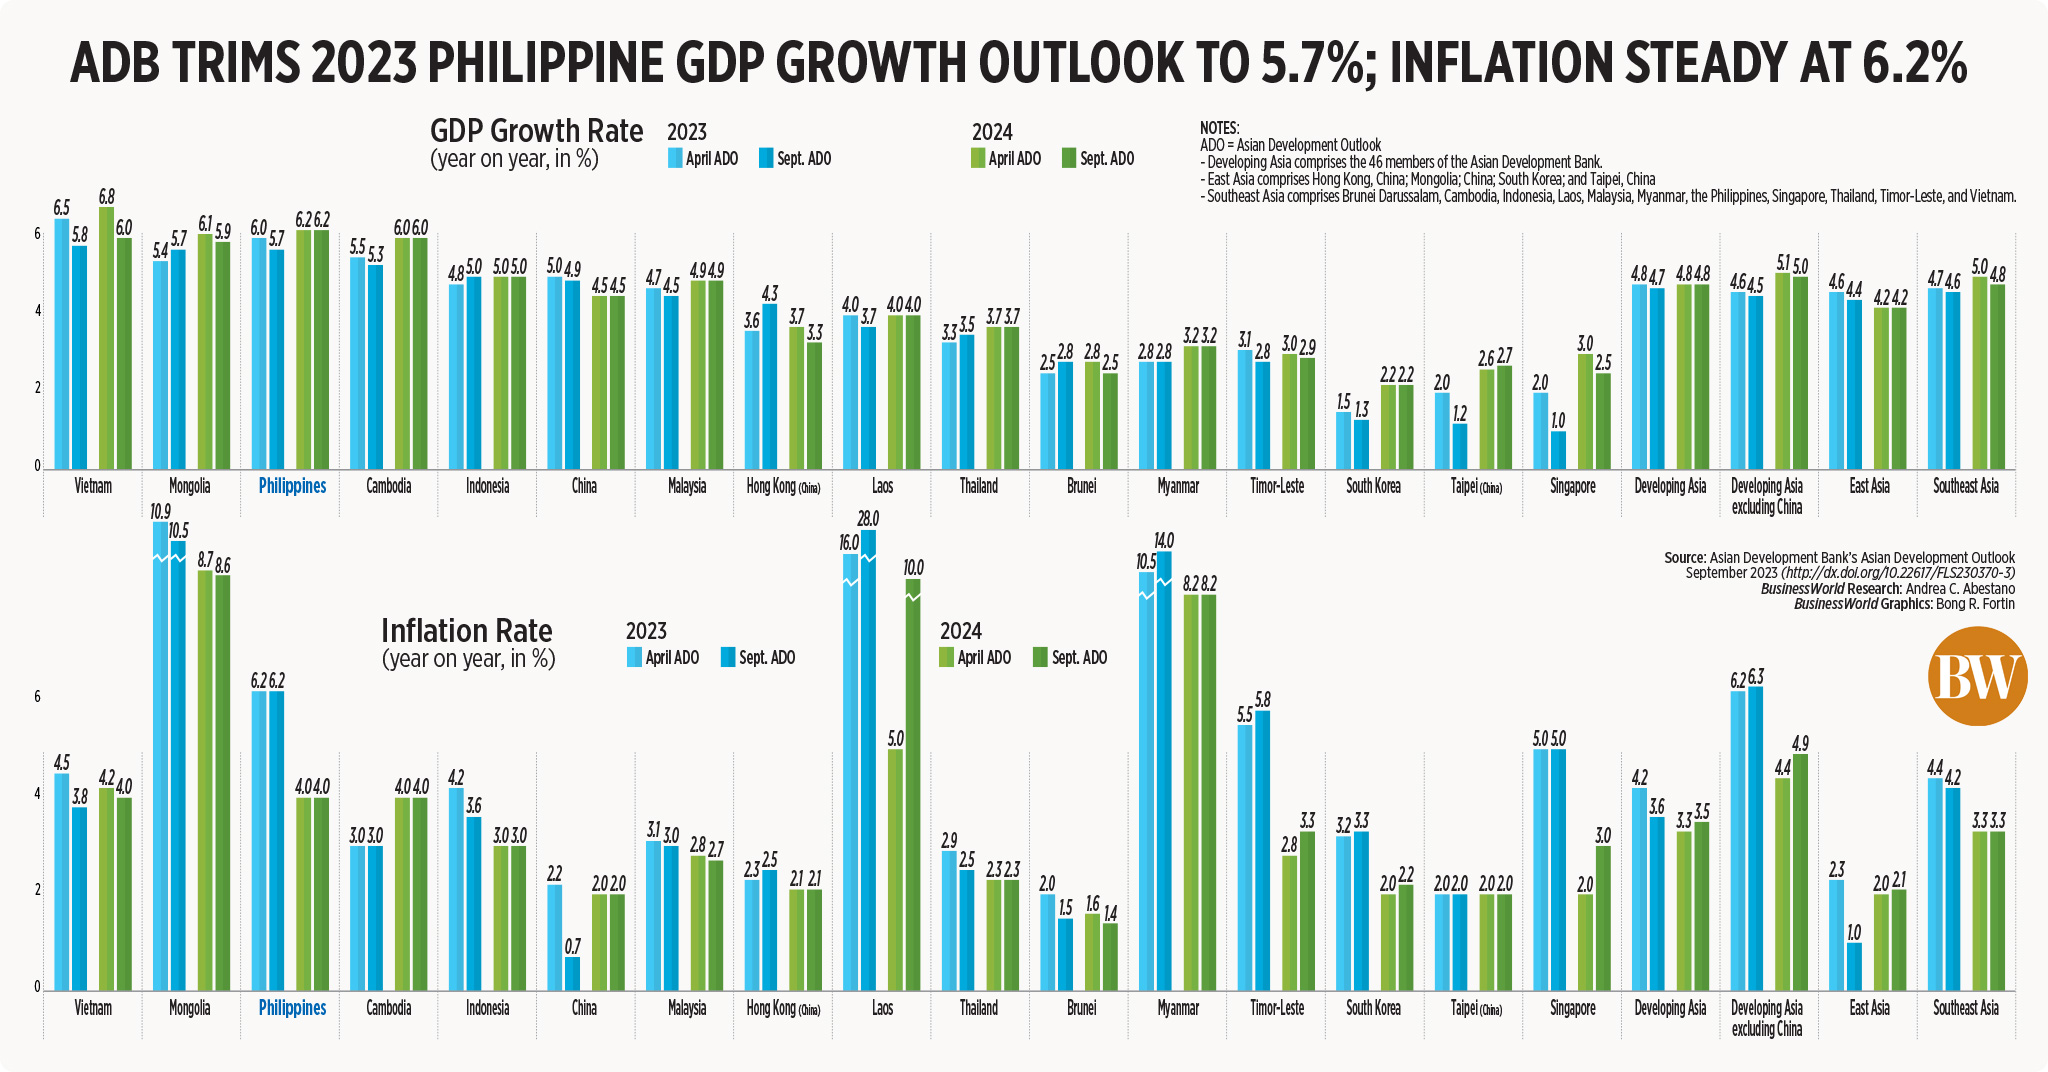 ADB trims 2023 Philippine GDP growth outlook to 5.7%; inflation steady at 6.2%